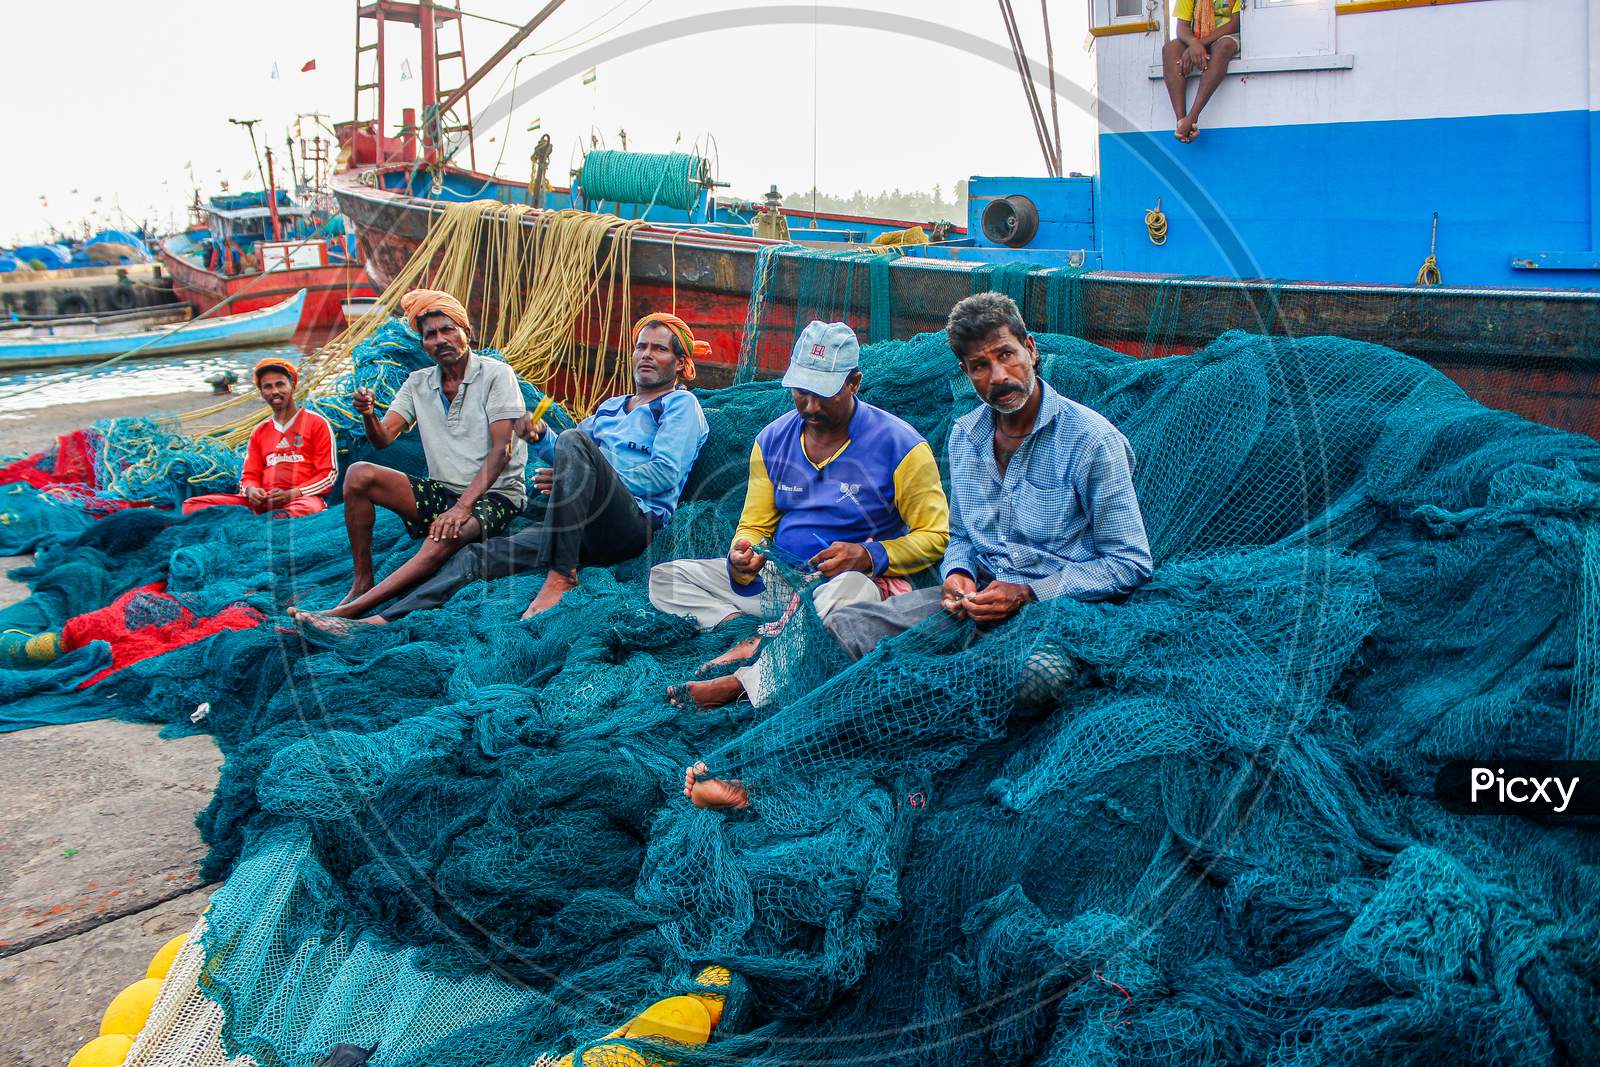 fisherman working on nets in fishery port old mangalore port